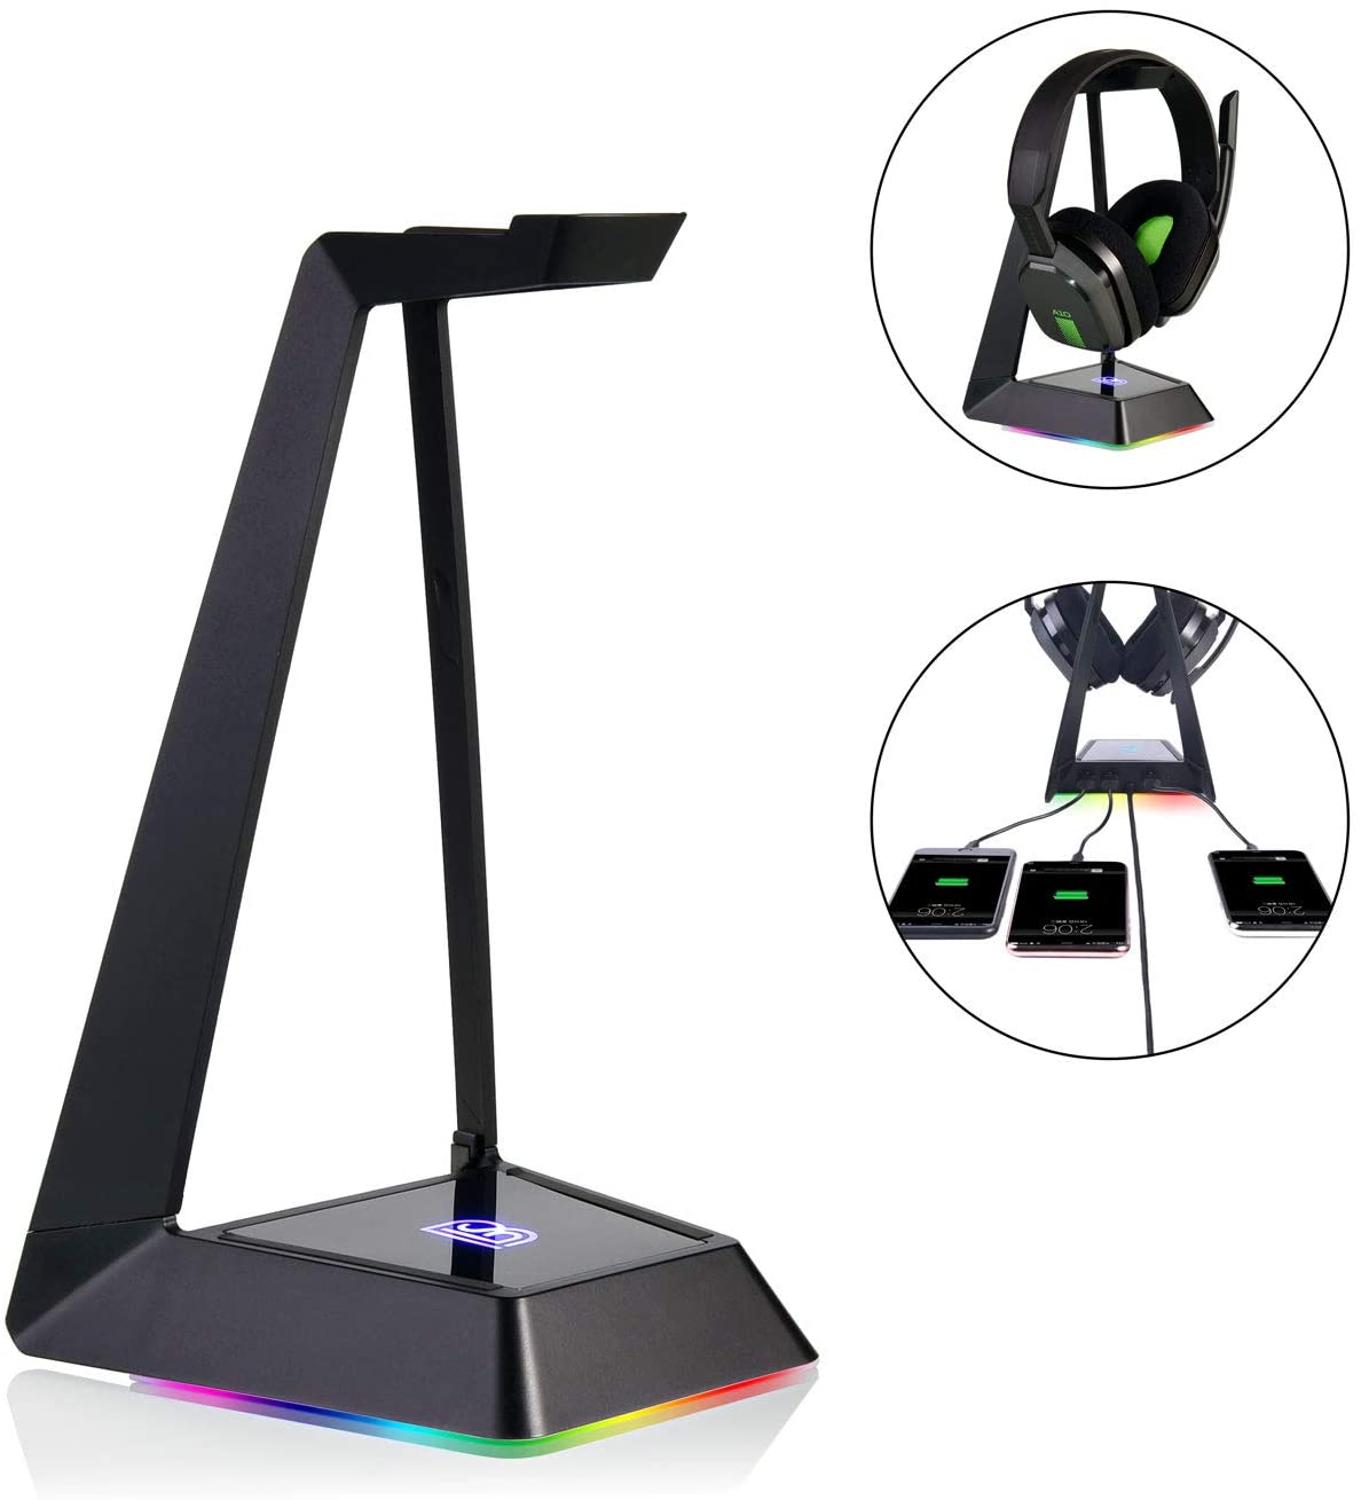 Bluesolids RGB Headphone Stand with 3 2.0 USB Hubs Holder Headset Hanger Rack for Desk Gaming Headset